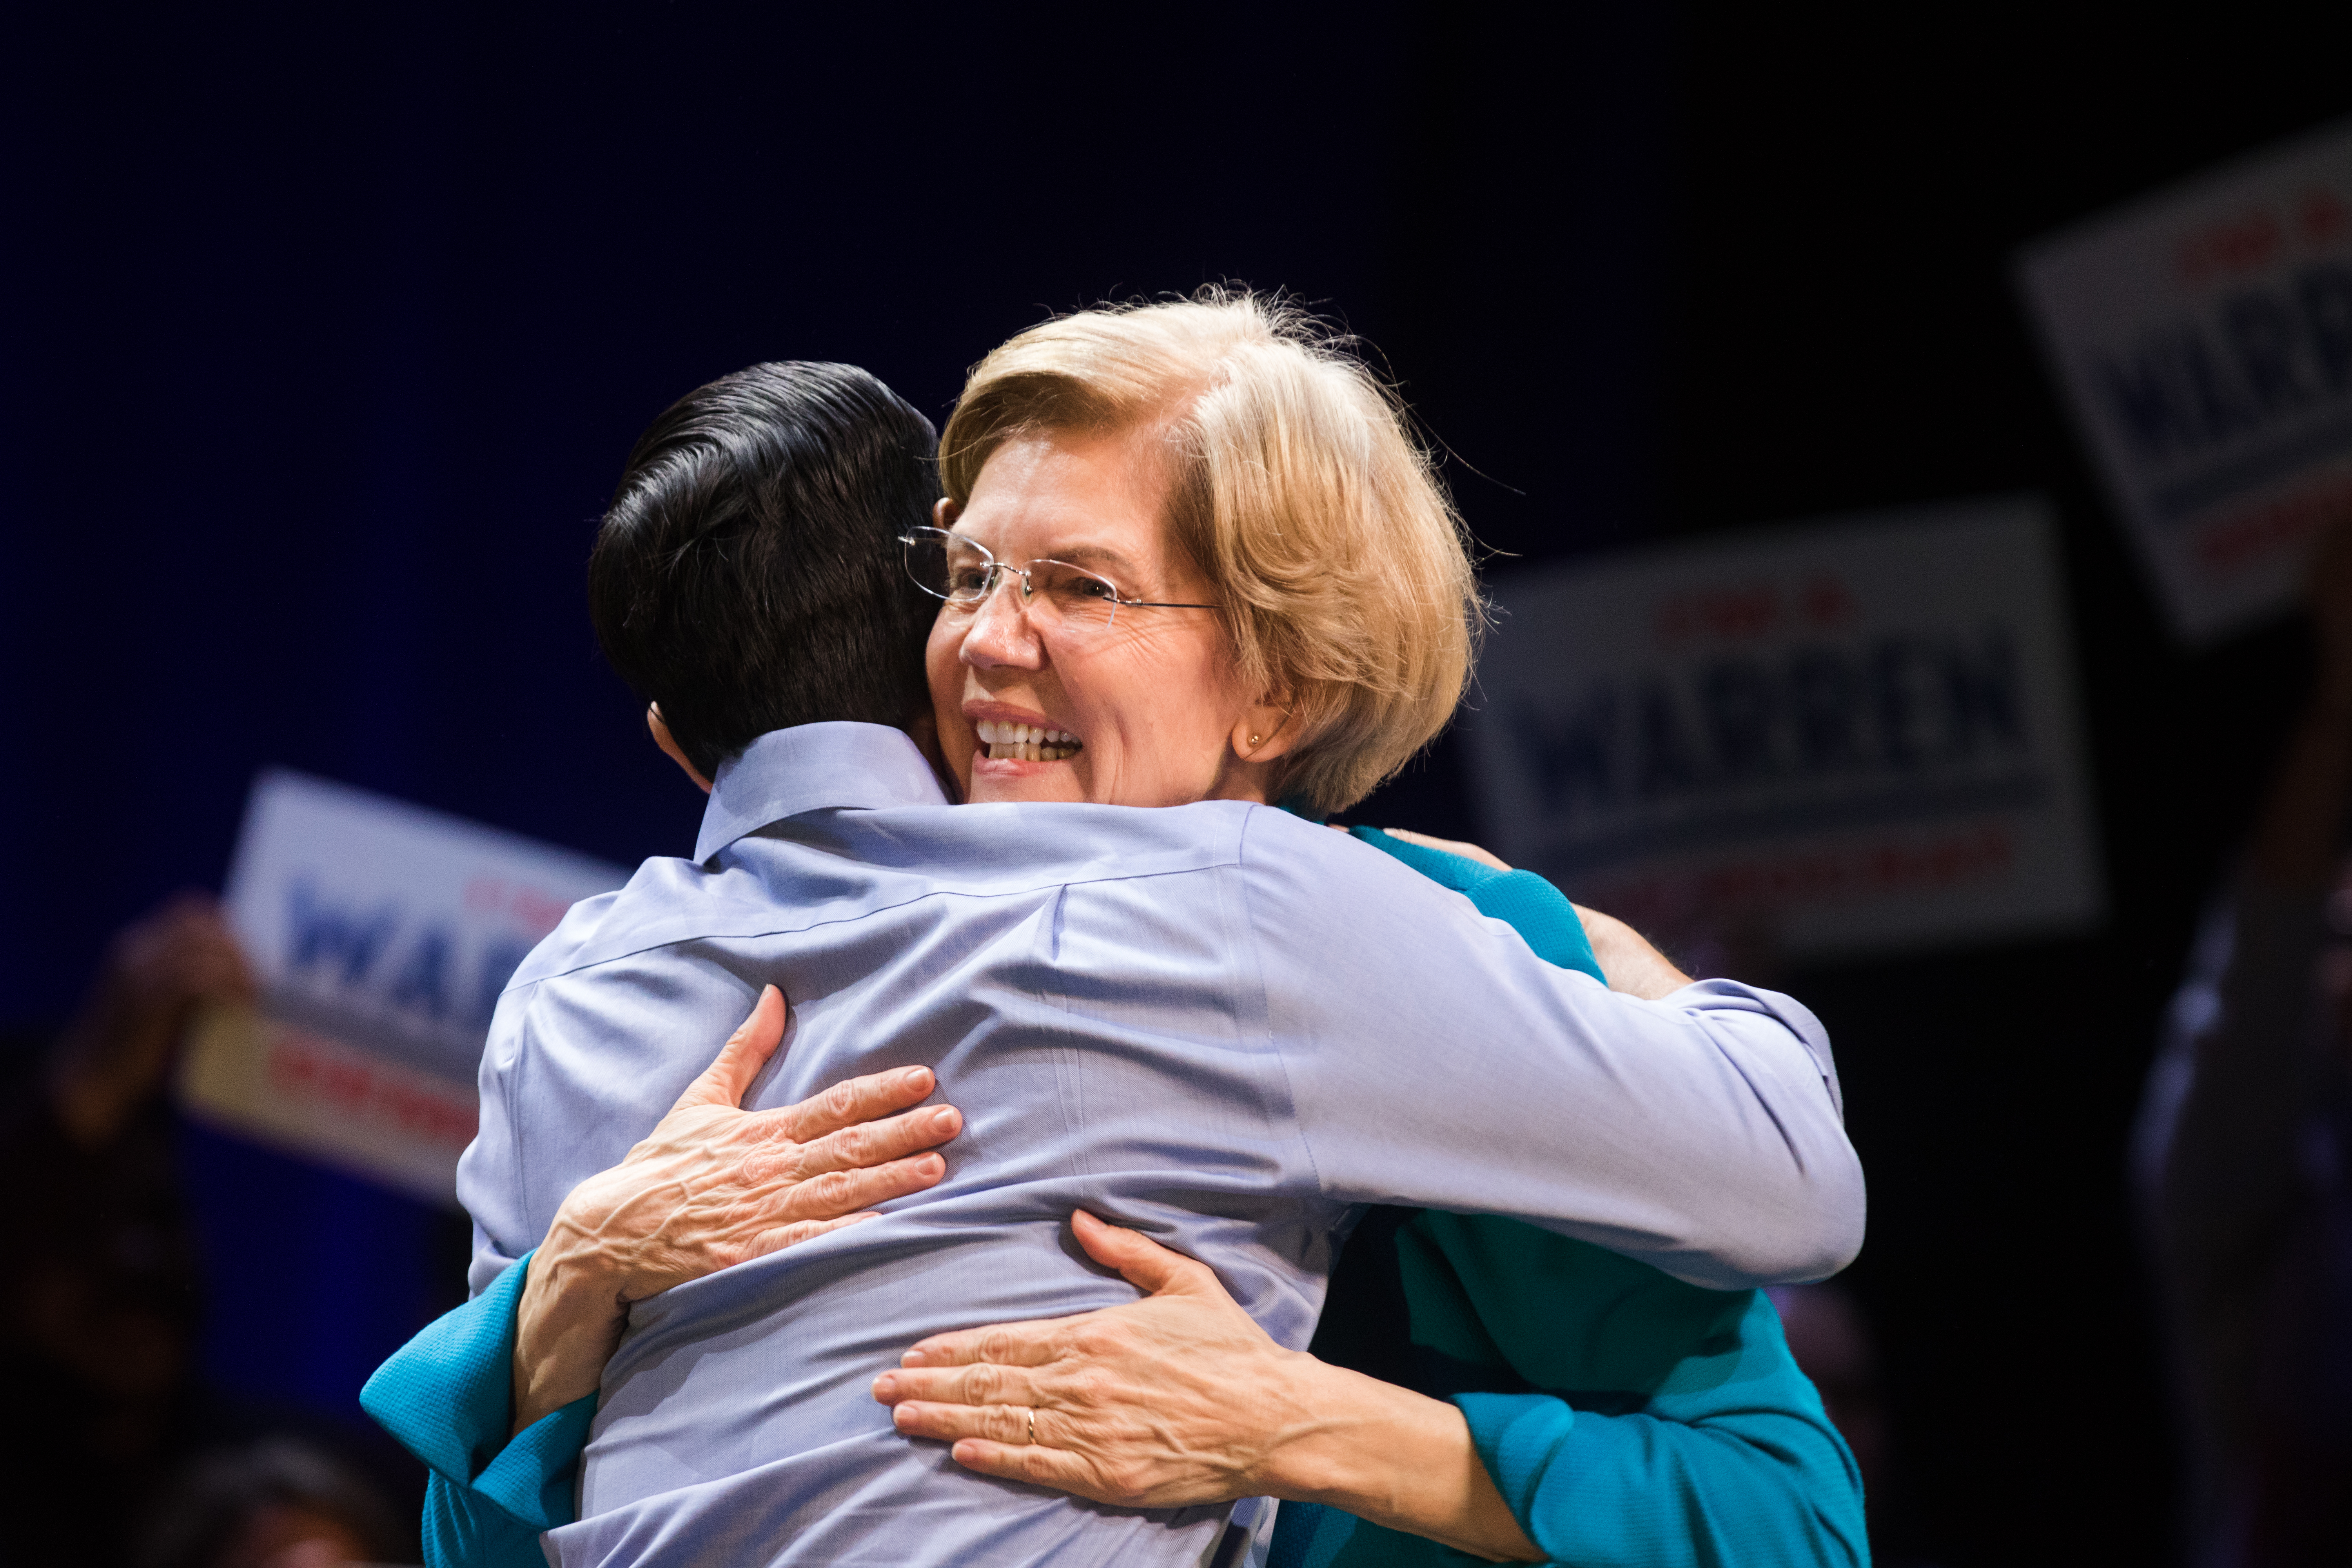 Castro announced on Monday that he would be endorsing Warren for president. Photo: Paul Frangipane/Brooklyn Eagle